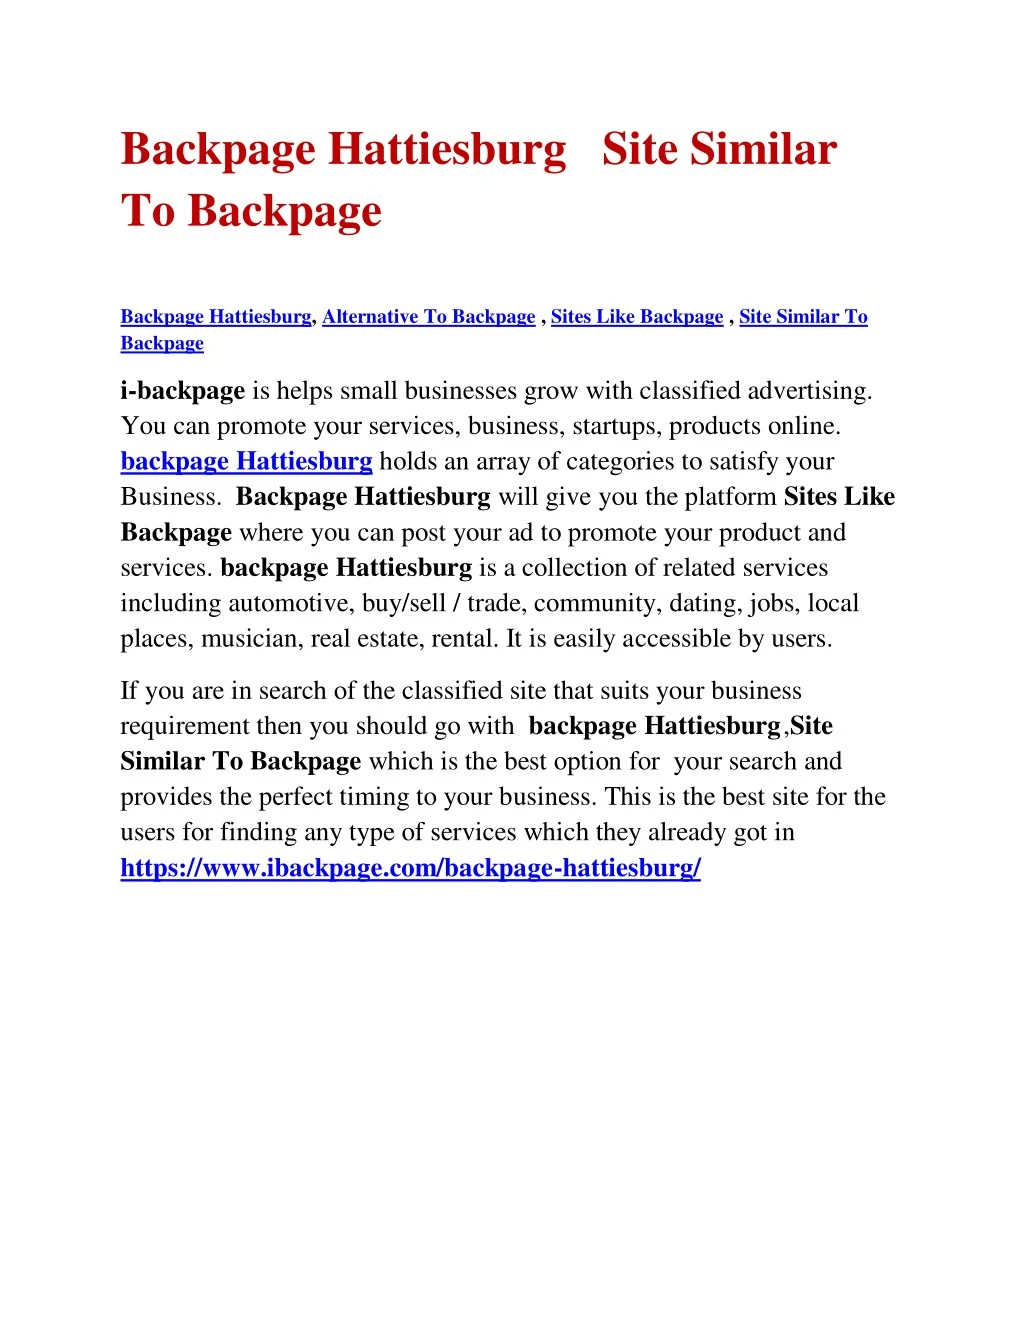 backpage hattiesburg site similar to backpage